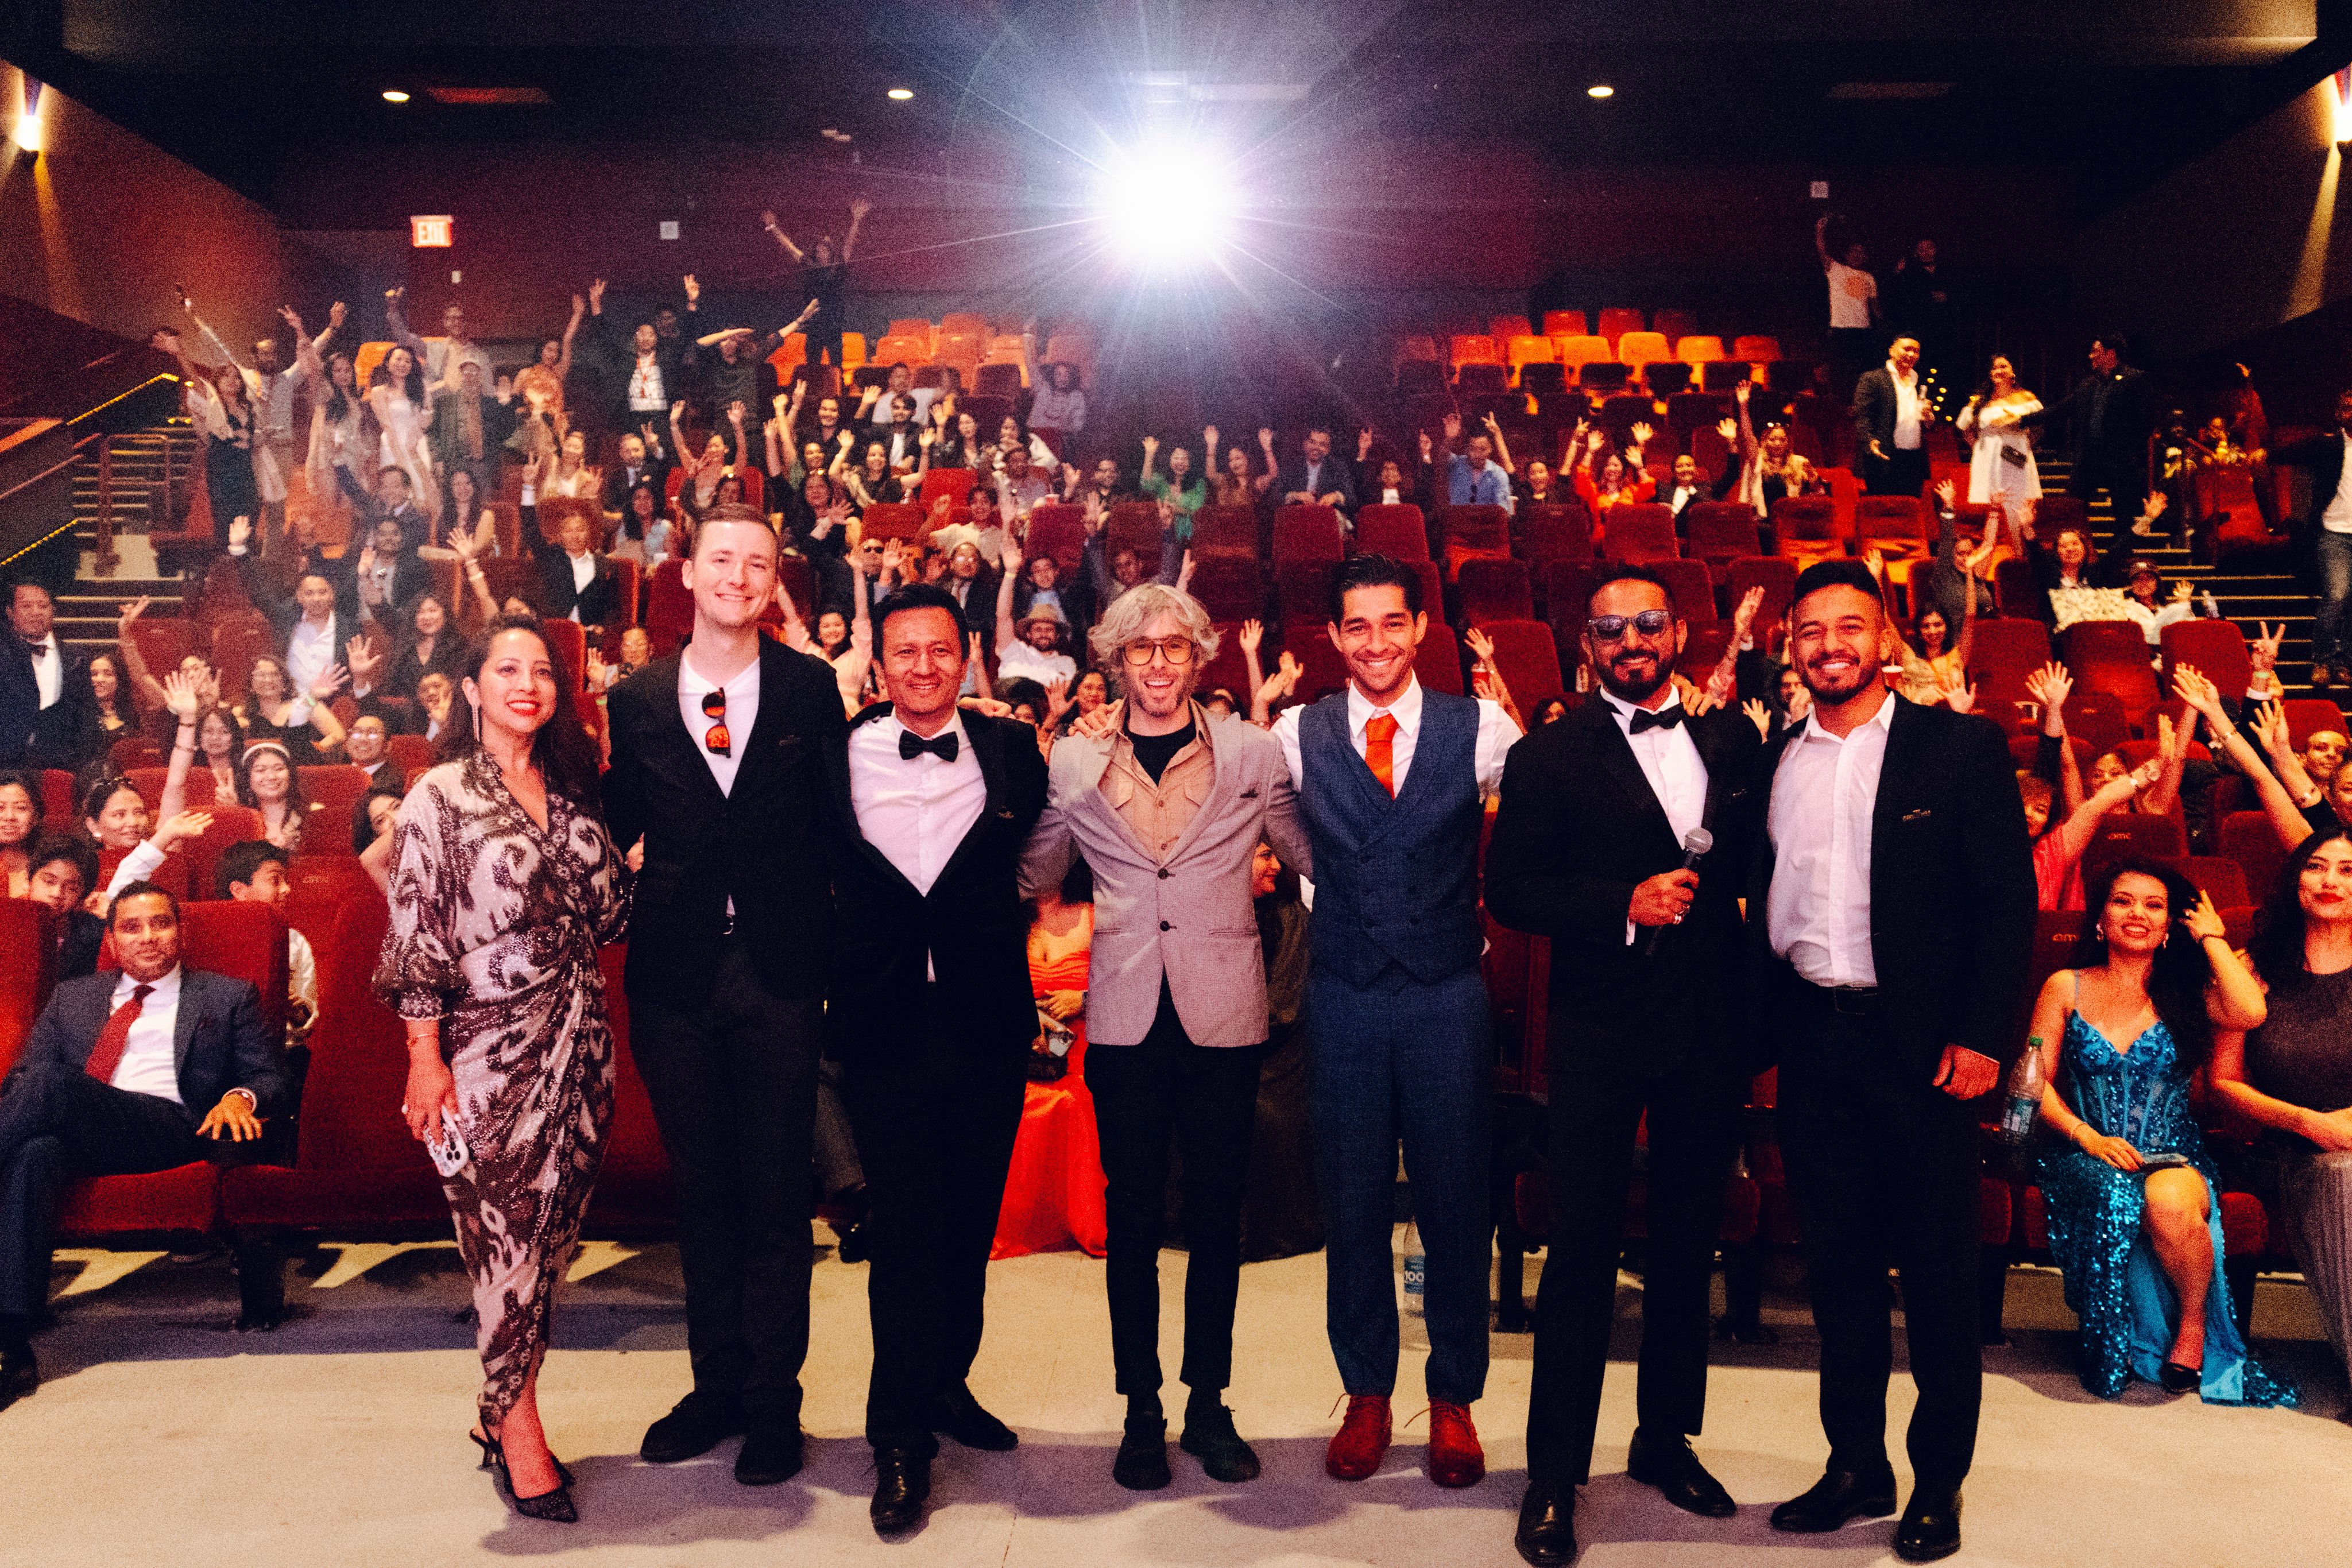 The Challengers: Game of Himalayas" premiered at AMC Empire 25 in New York